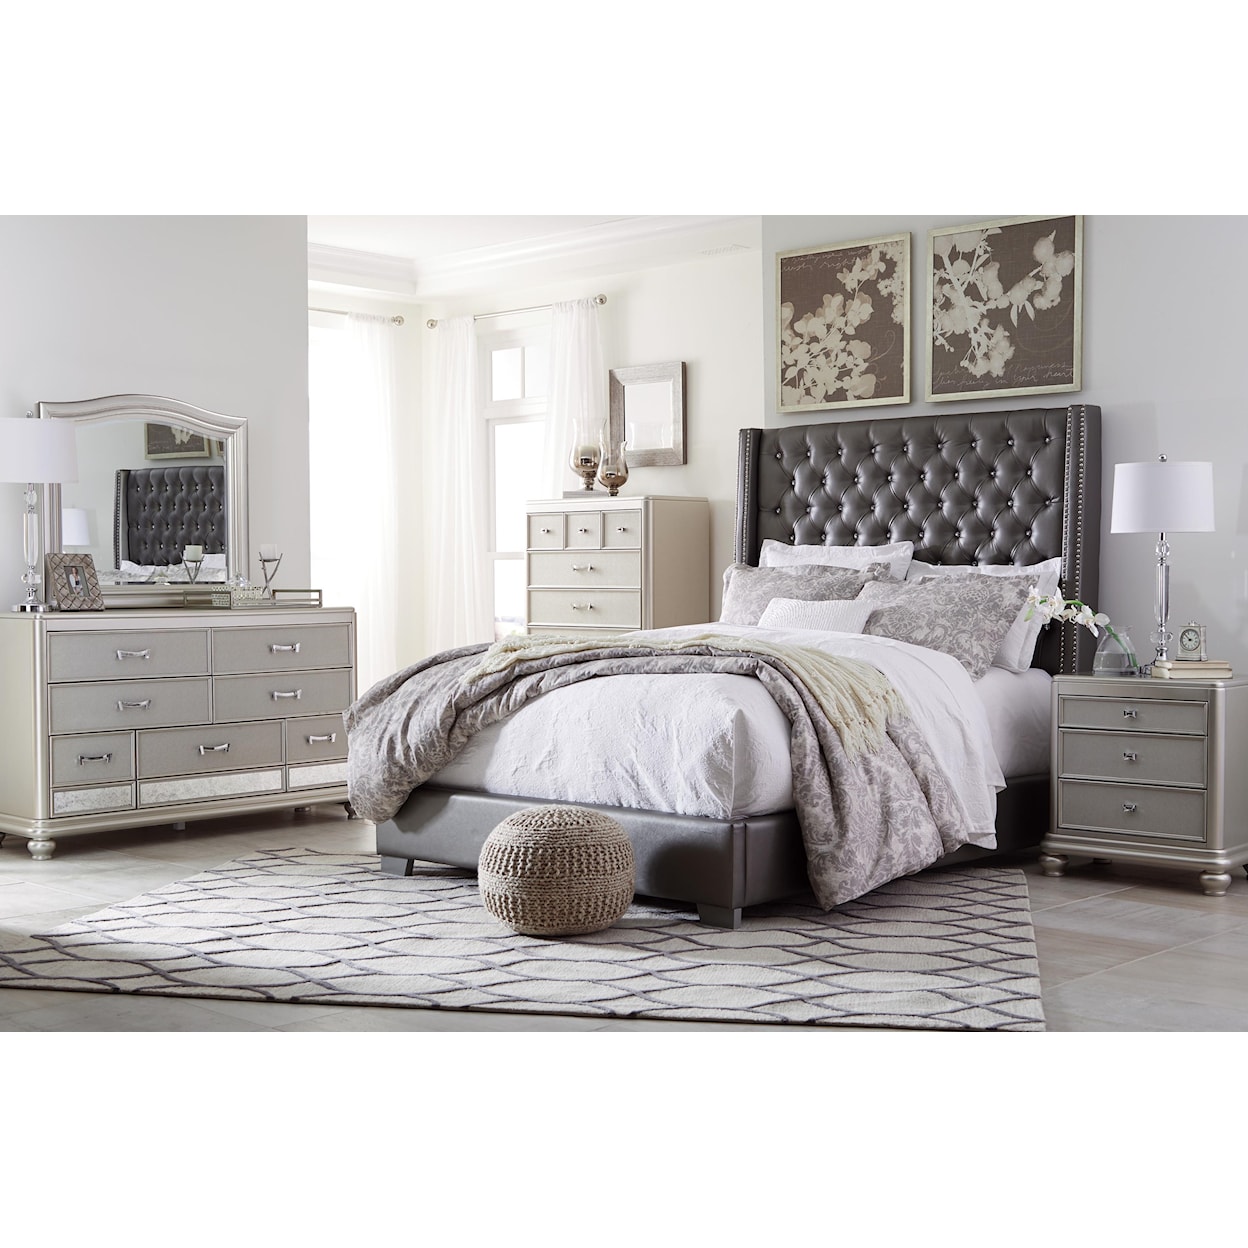 Signature Design by Ashley Coralayne 5 Piece King Upholstered Bedroom Set